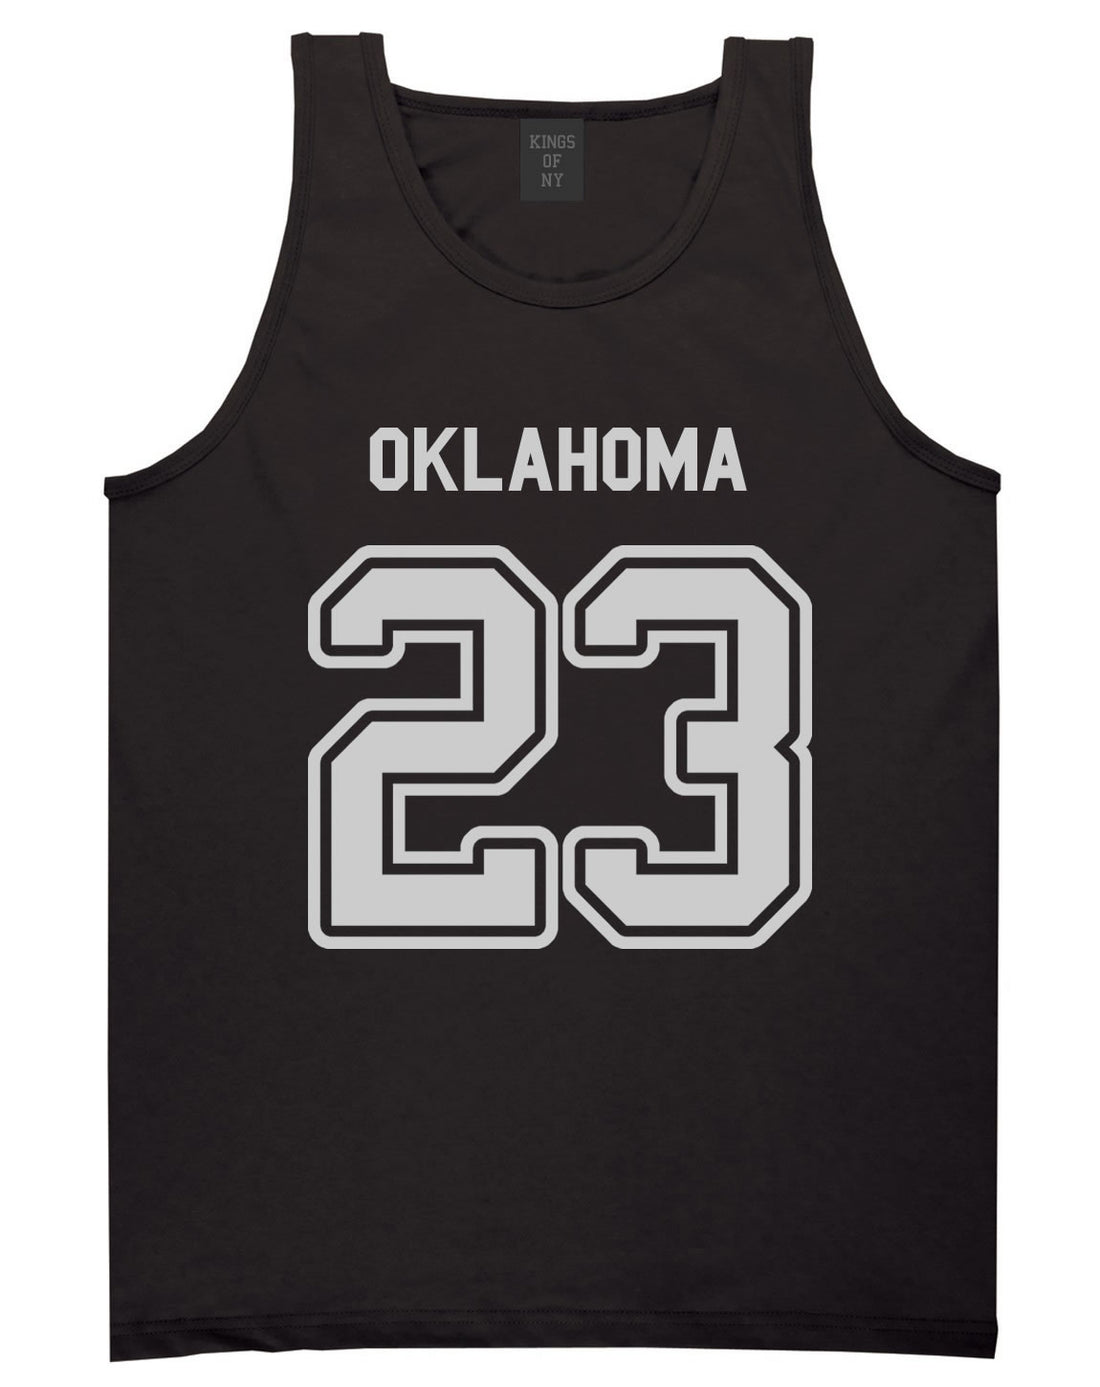 Sport Style Oklahoma 23 Team State Jersey Mens Tank Top By Kings Of NY